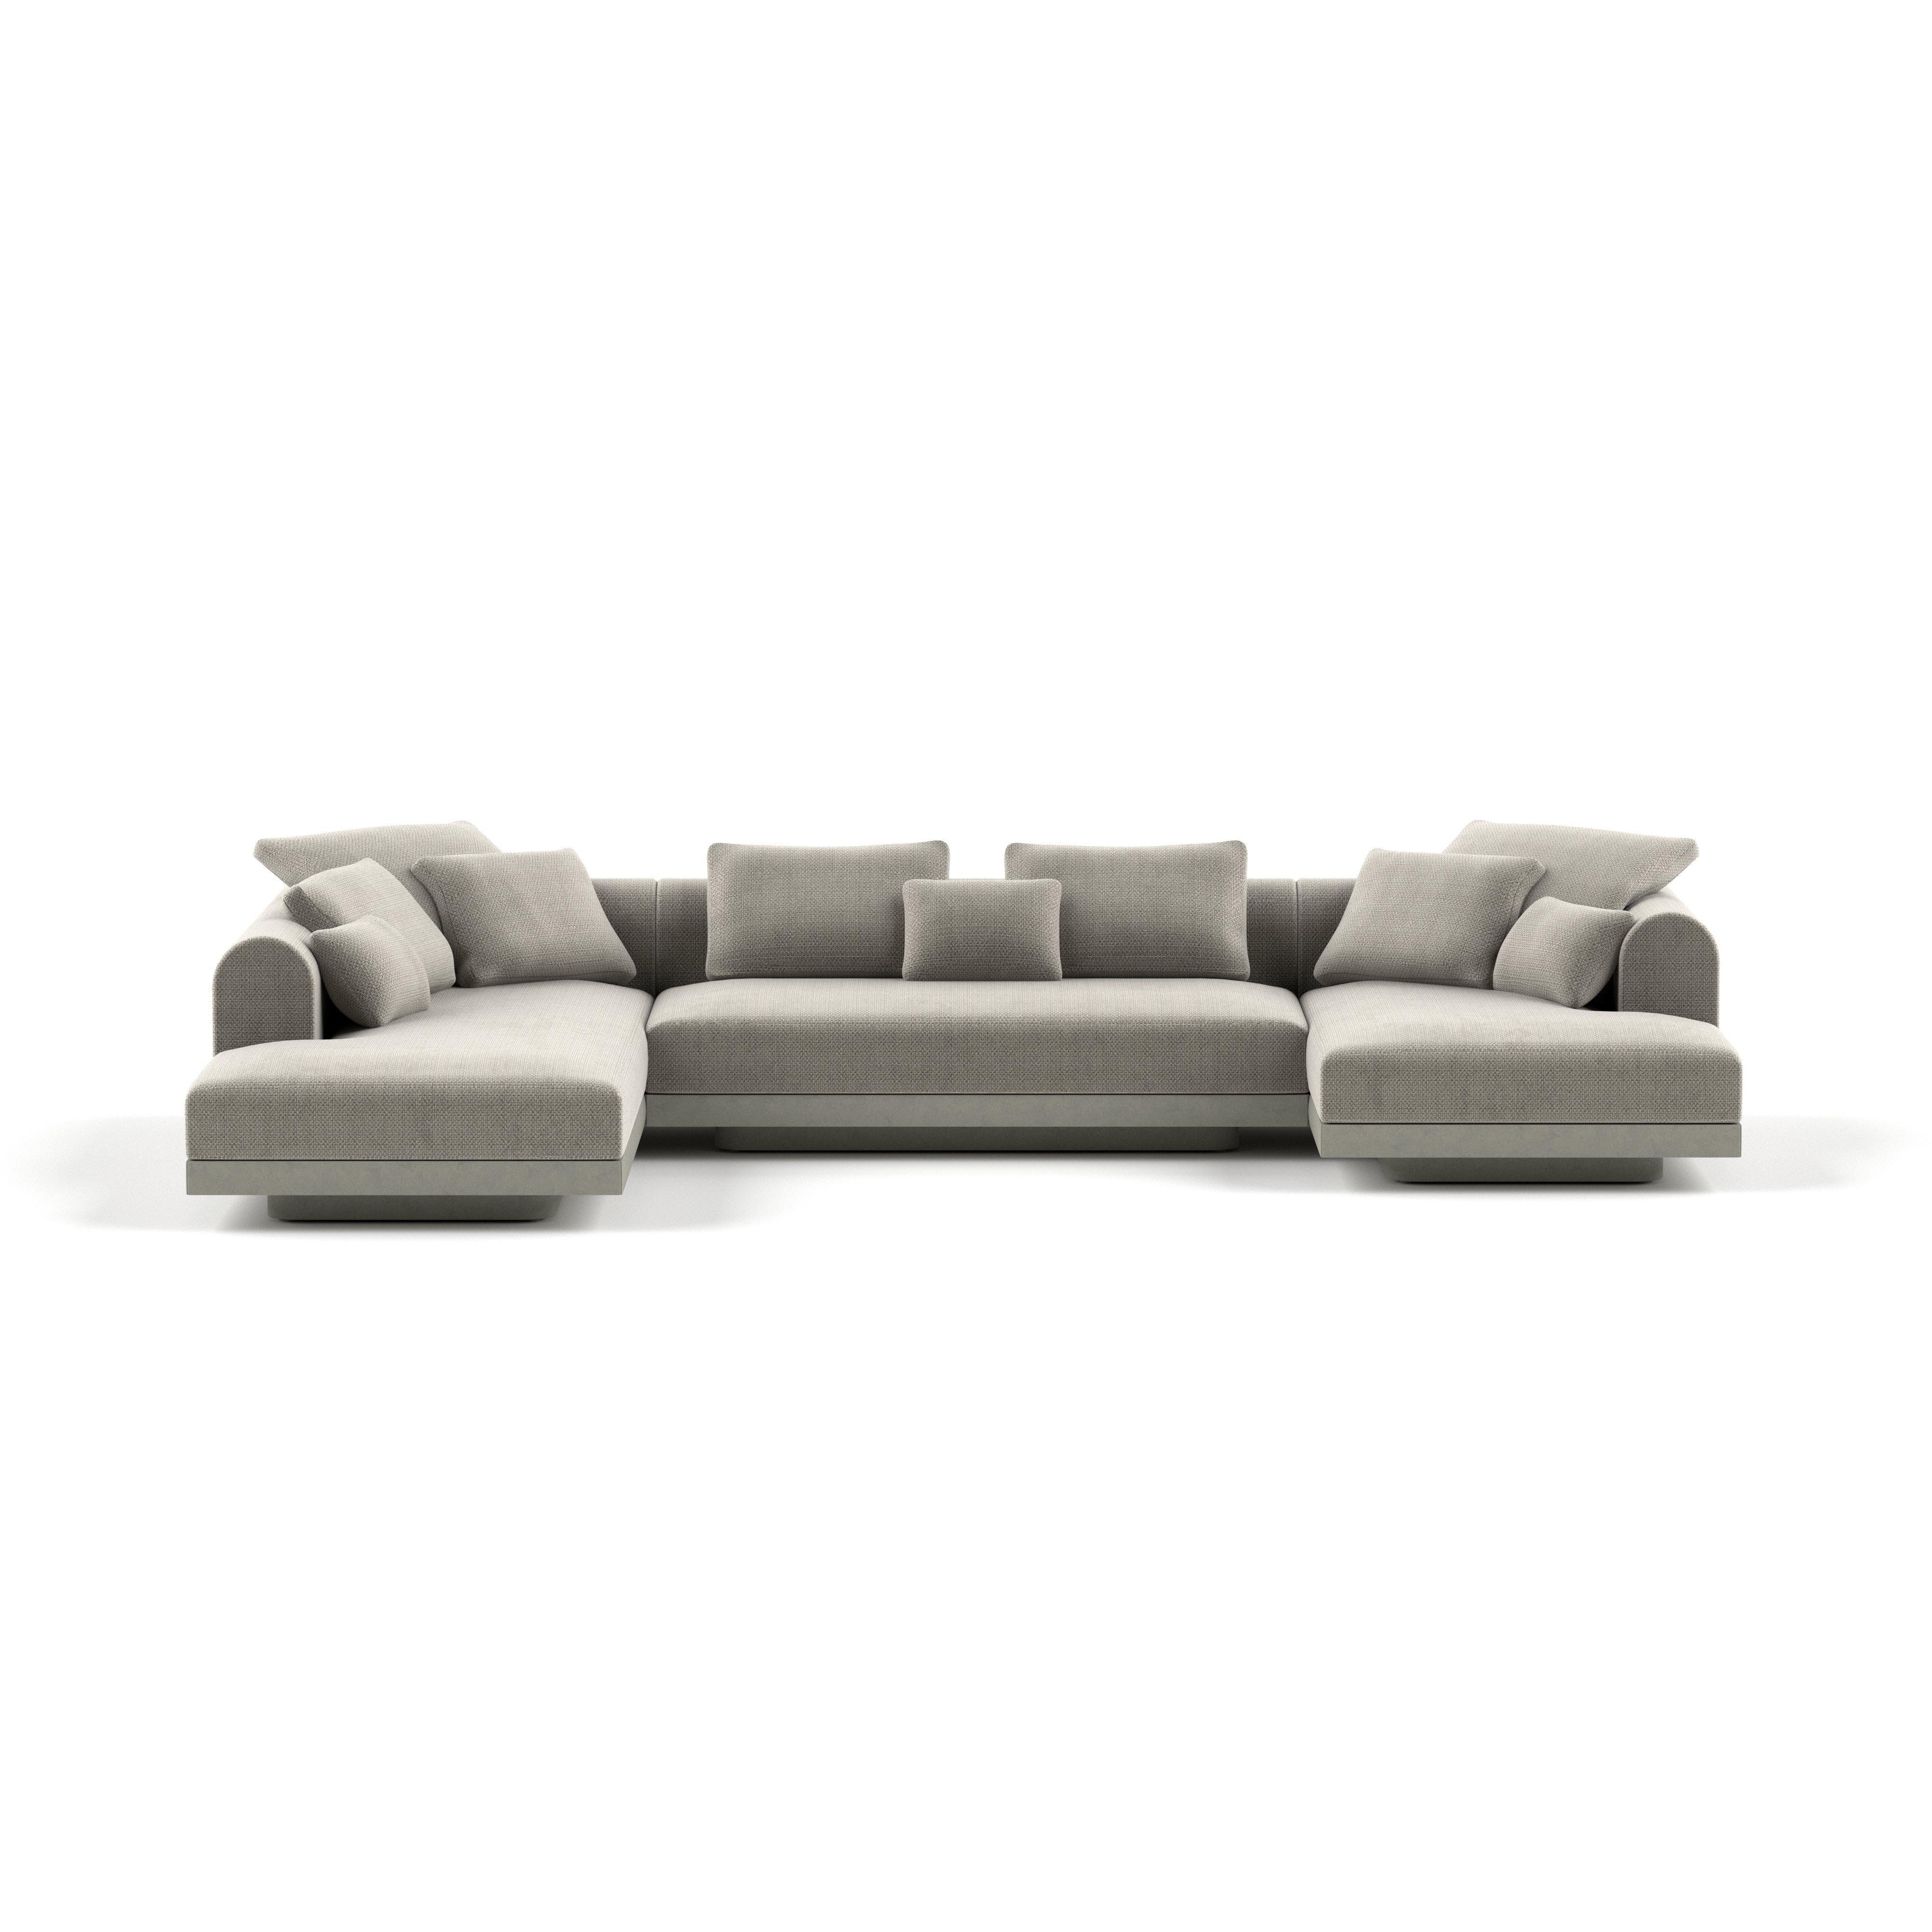 'Aqueduct' Contemporary Sofa by Poiat, Setup 4, Yang 95, HIgh Plinth For Sale 5